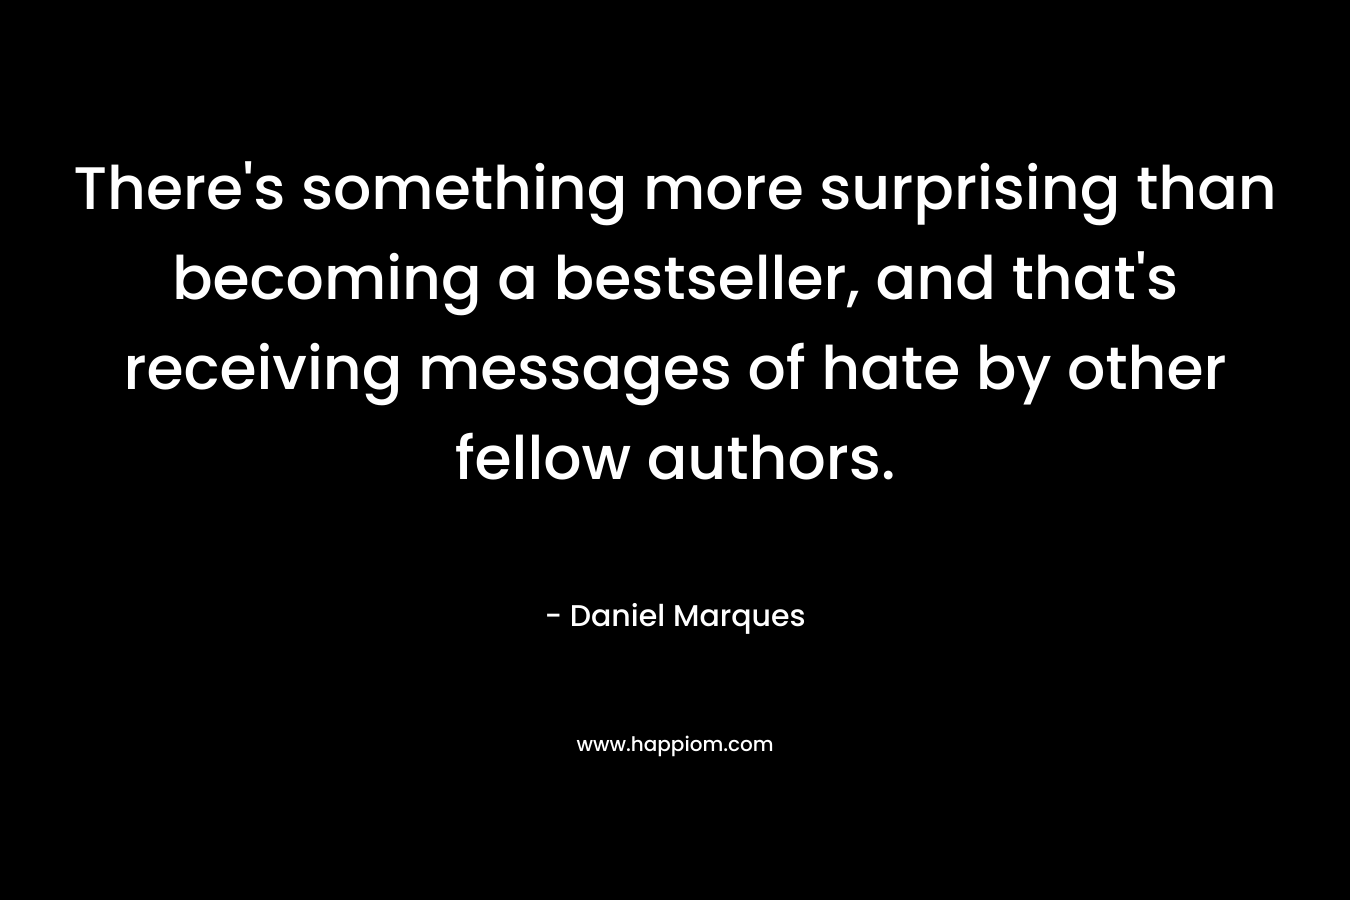 There’s something more surprising than becoming a bestseller, and that’s receiving messages of hate by other fellow authors. – Daniel Marques